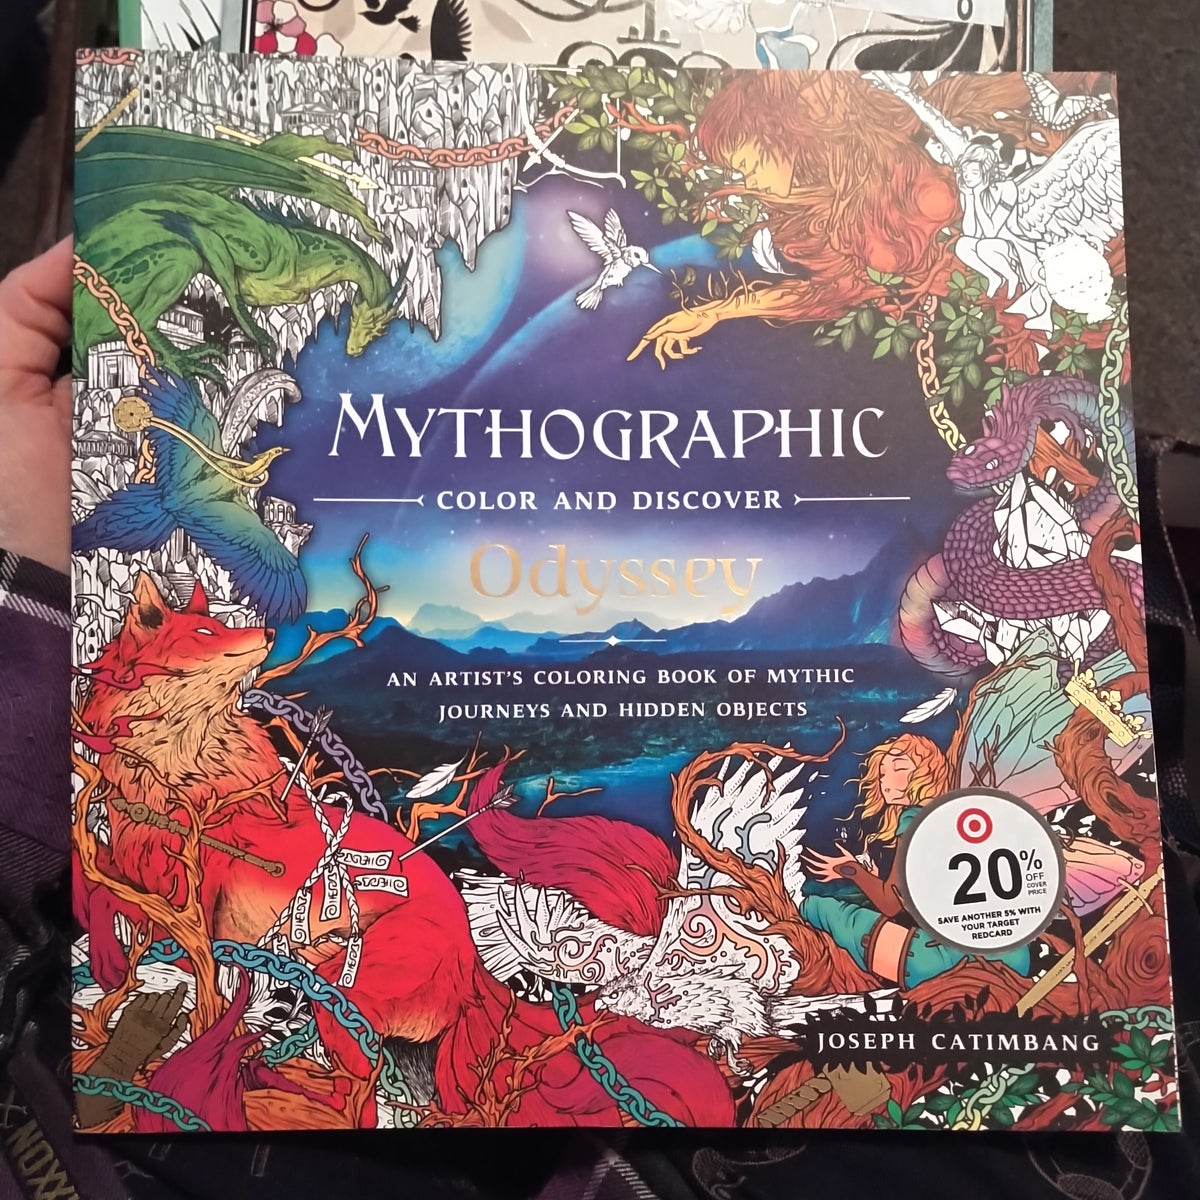 Mythographic Wanderlust Coloring Book